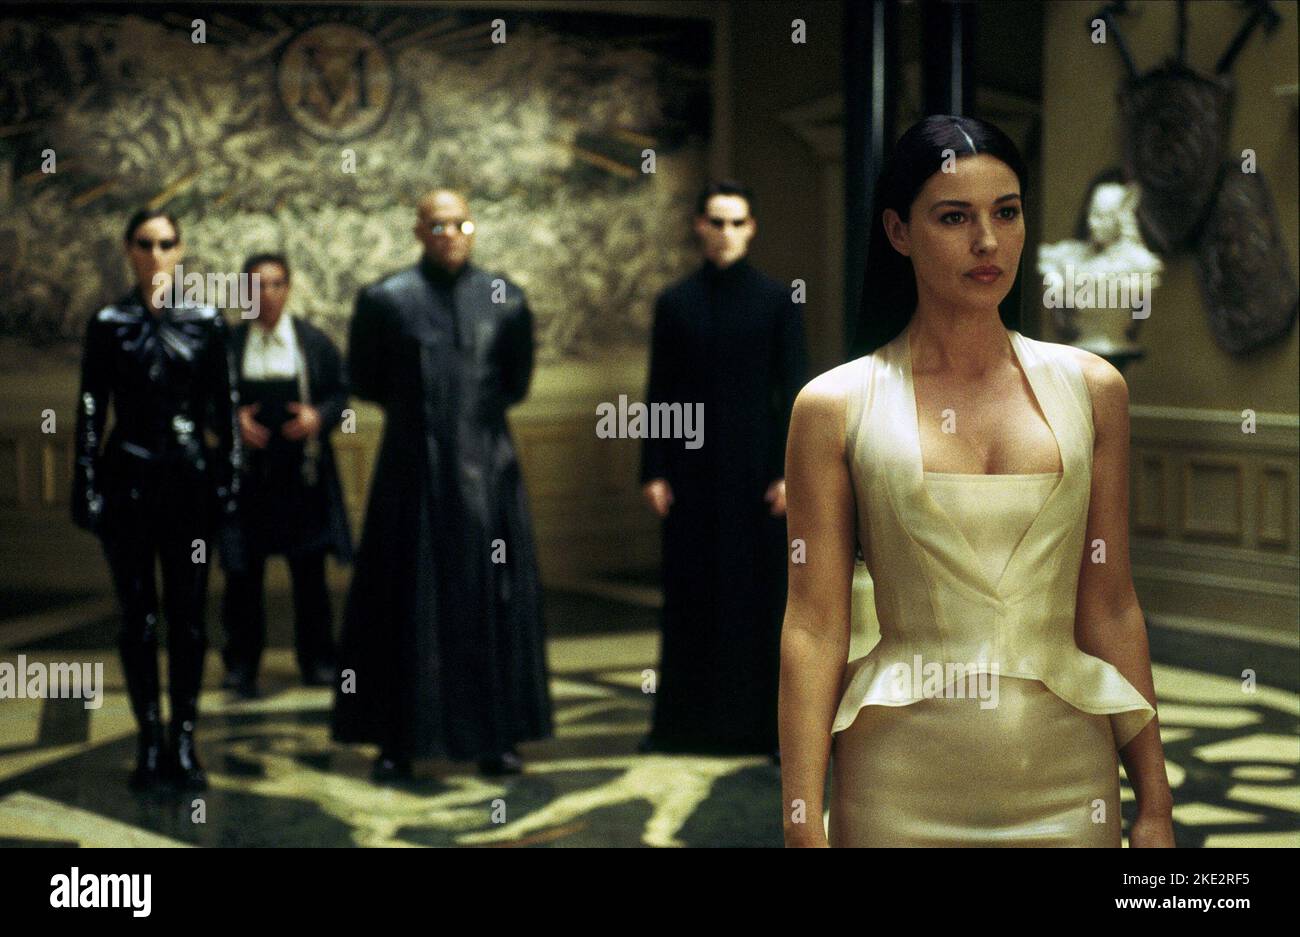 THE MATRIX RELOADED, CARRIE-ANNE MOSS, RANDALL DUK KIM,  LAURENCE FISHBURNE, KEANU REEVES, MONICA BELLUCCI, 2003 Stock Photo